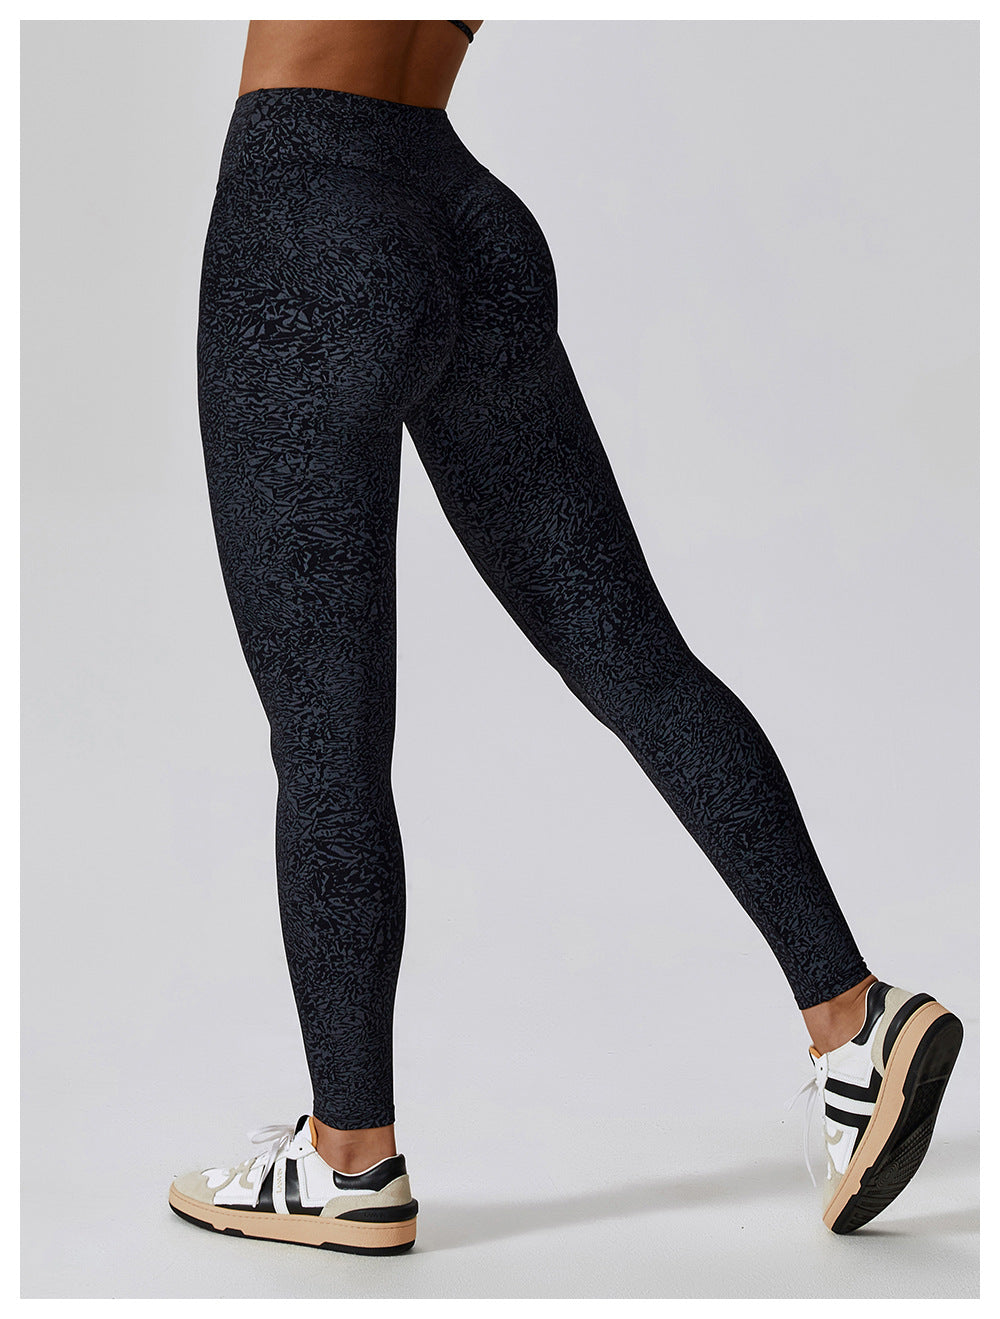 23.07 Camouflage printed high-waisted yoga pants belly-holding hip-lifting running sports quick-drying fitness pants 8256